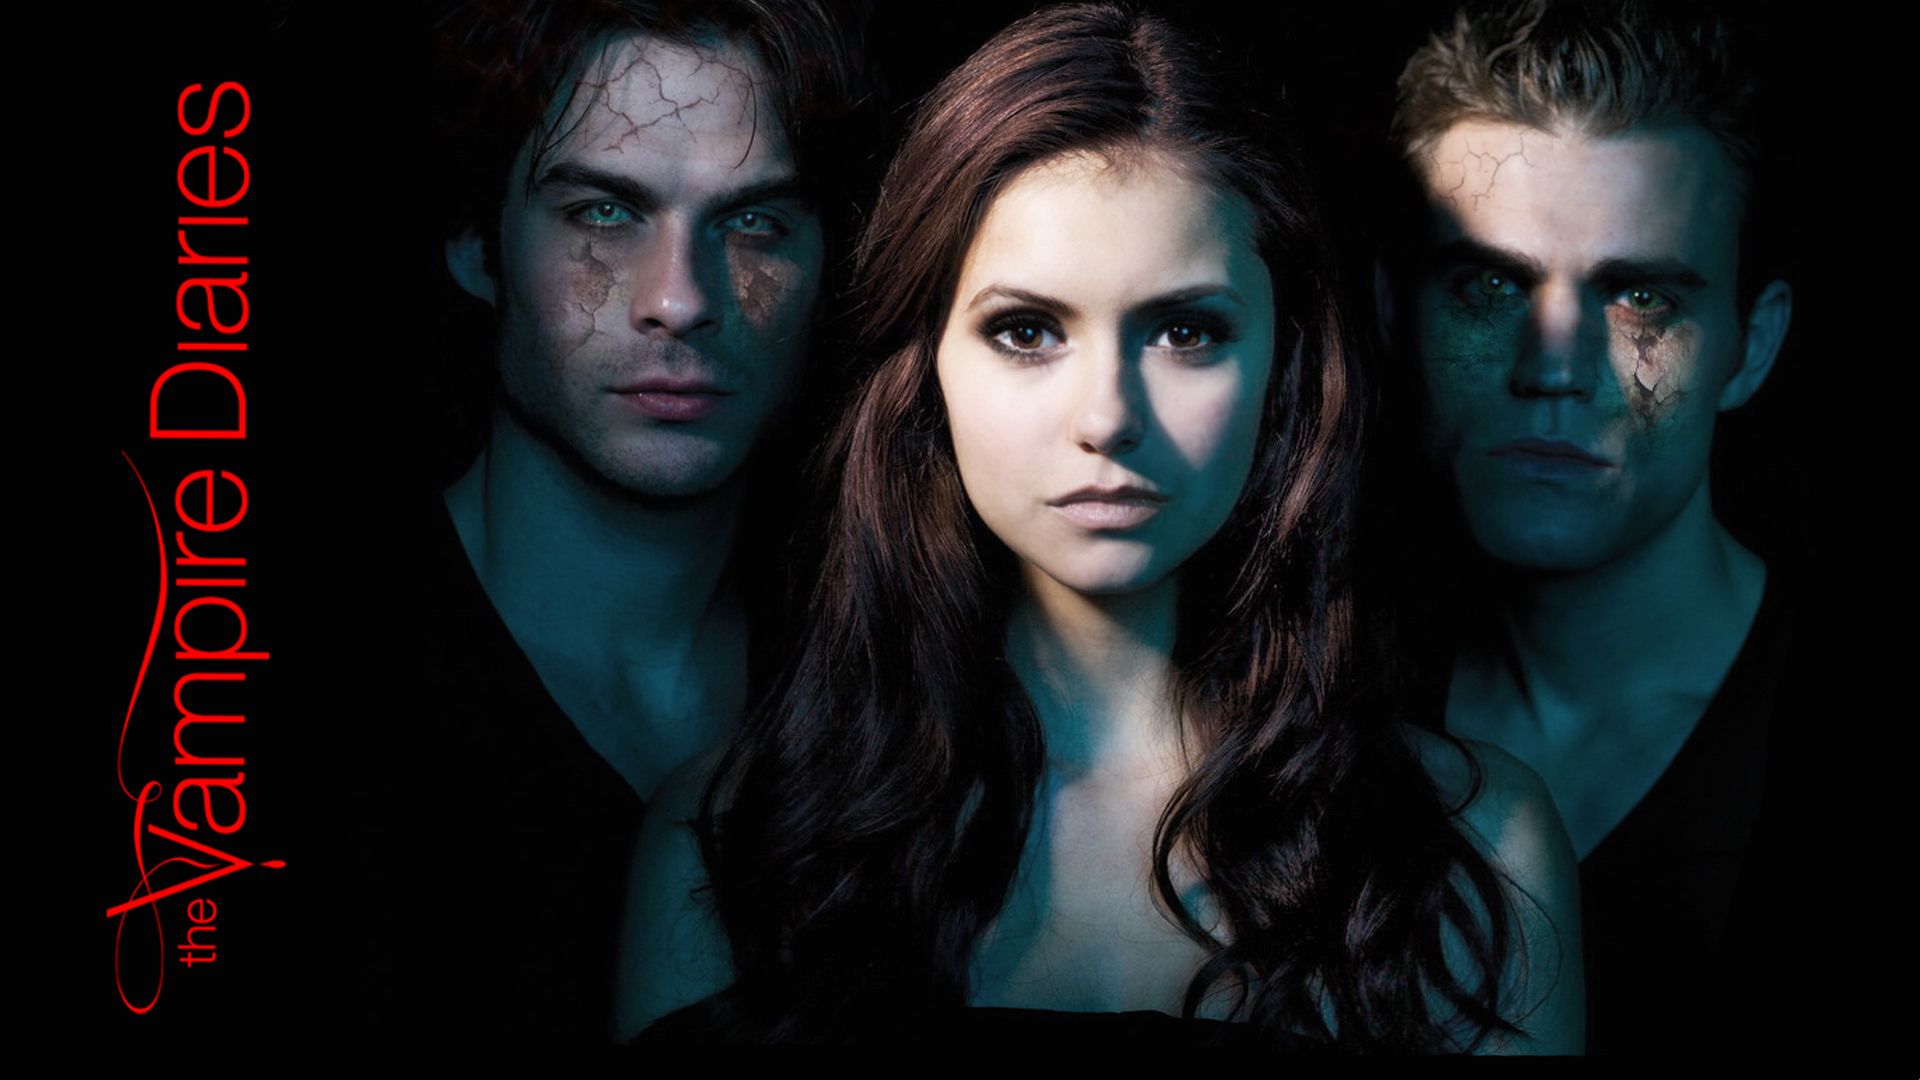 Aesthetic Collage Vampire Diaries Wallpapers Wallpaper Cave